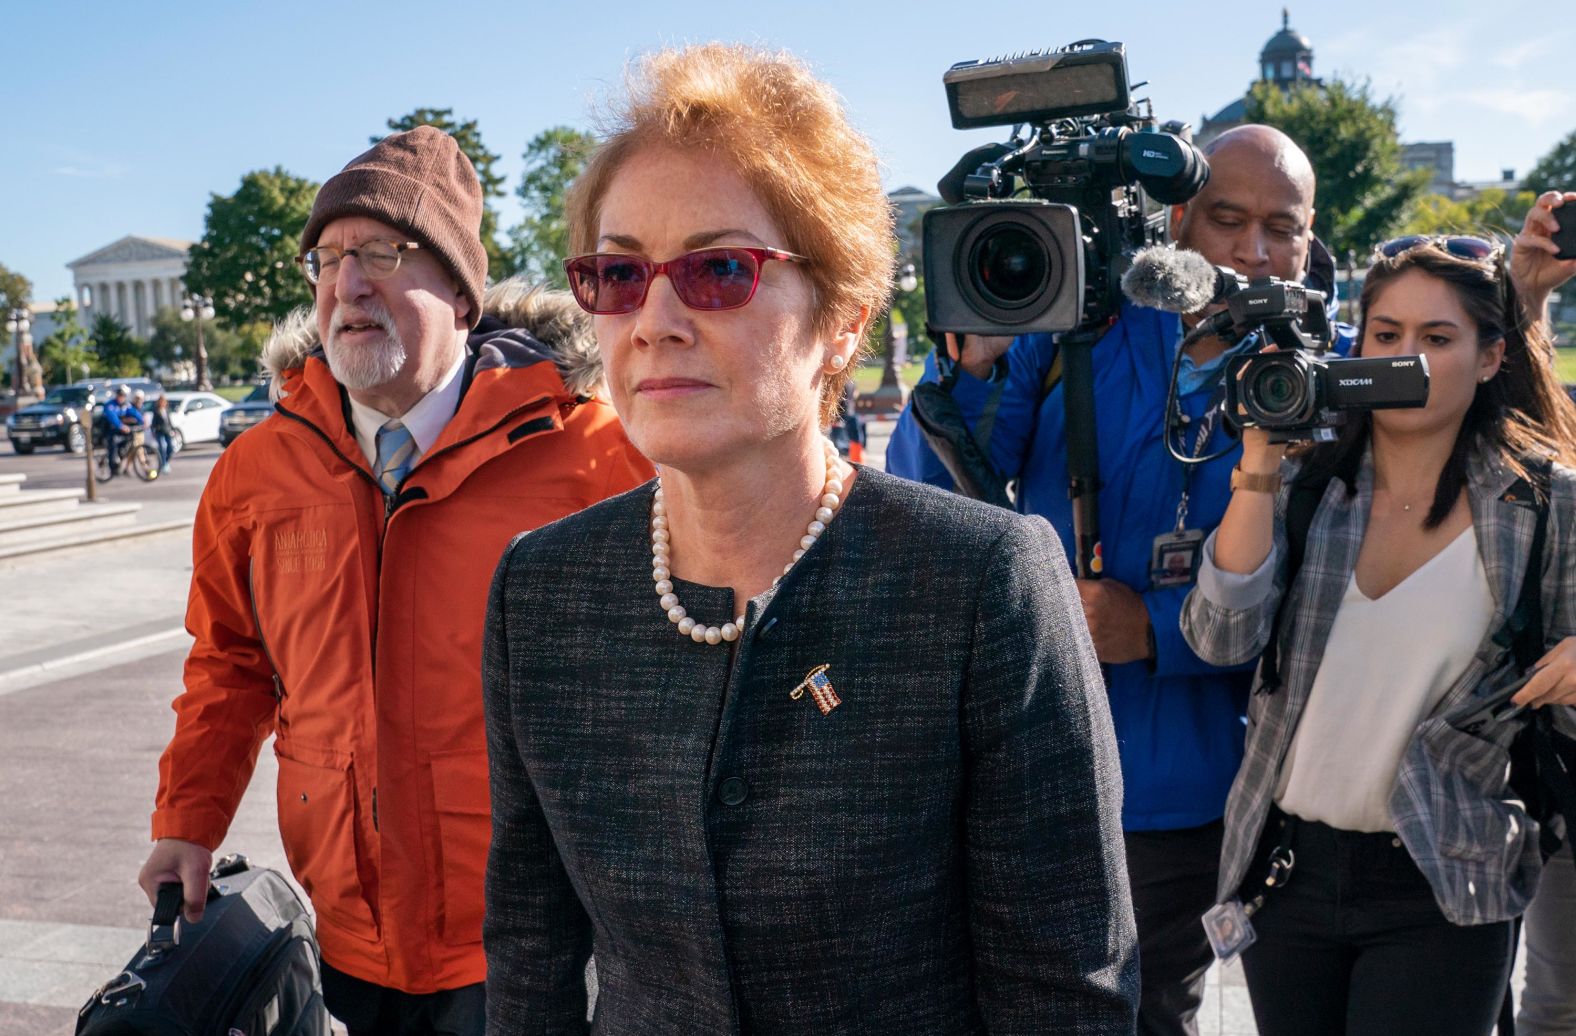 Marie Yovanovitch, former US ambassador to Ukraine, arrives on Capitol Hill on October 11. <a href="index.php?page=&url=https%3A%2F%2Fwww.cnn.com%2F2019%2F10%2F11%2Fpolitics%2Fmarie-yovanovitch-testimony-ukraine%2Findex.html" target="_blank">She was scheduled to testify</a> before congressional lawmakers as part of the House impeachment inquiry. Yovanovitch was unexpectedly pulled from her position in the spring.